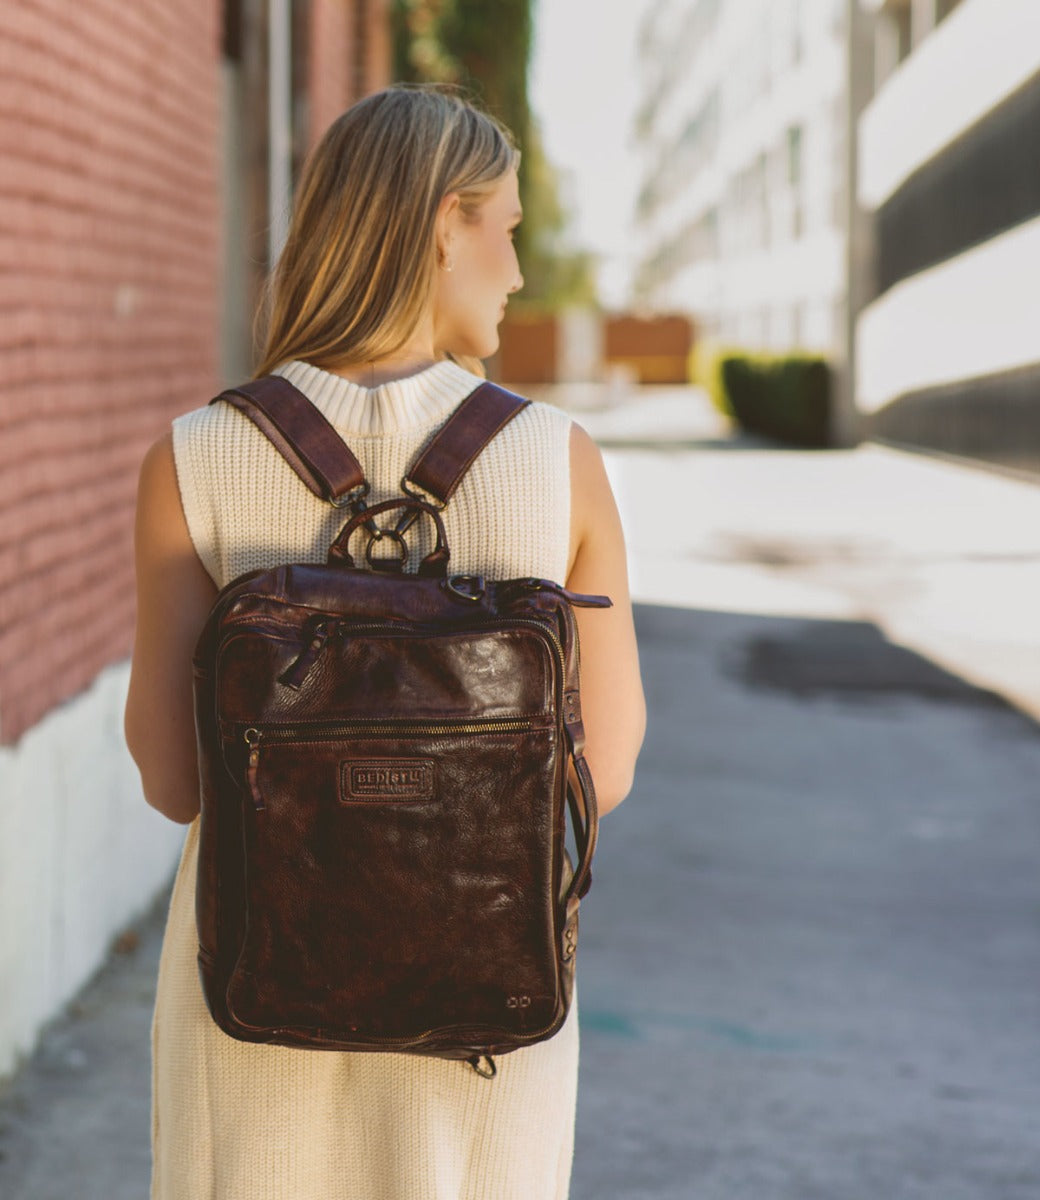 A woman wearing a brown leather Socrates backpack made by Bed Stu walking down the street.